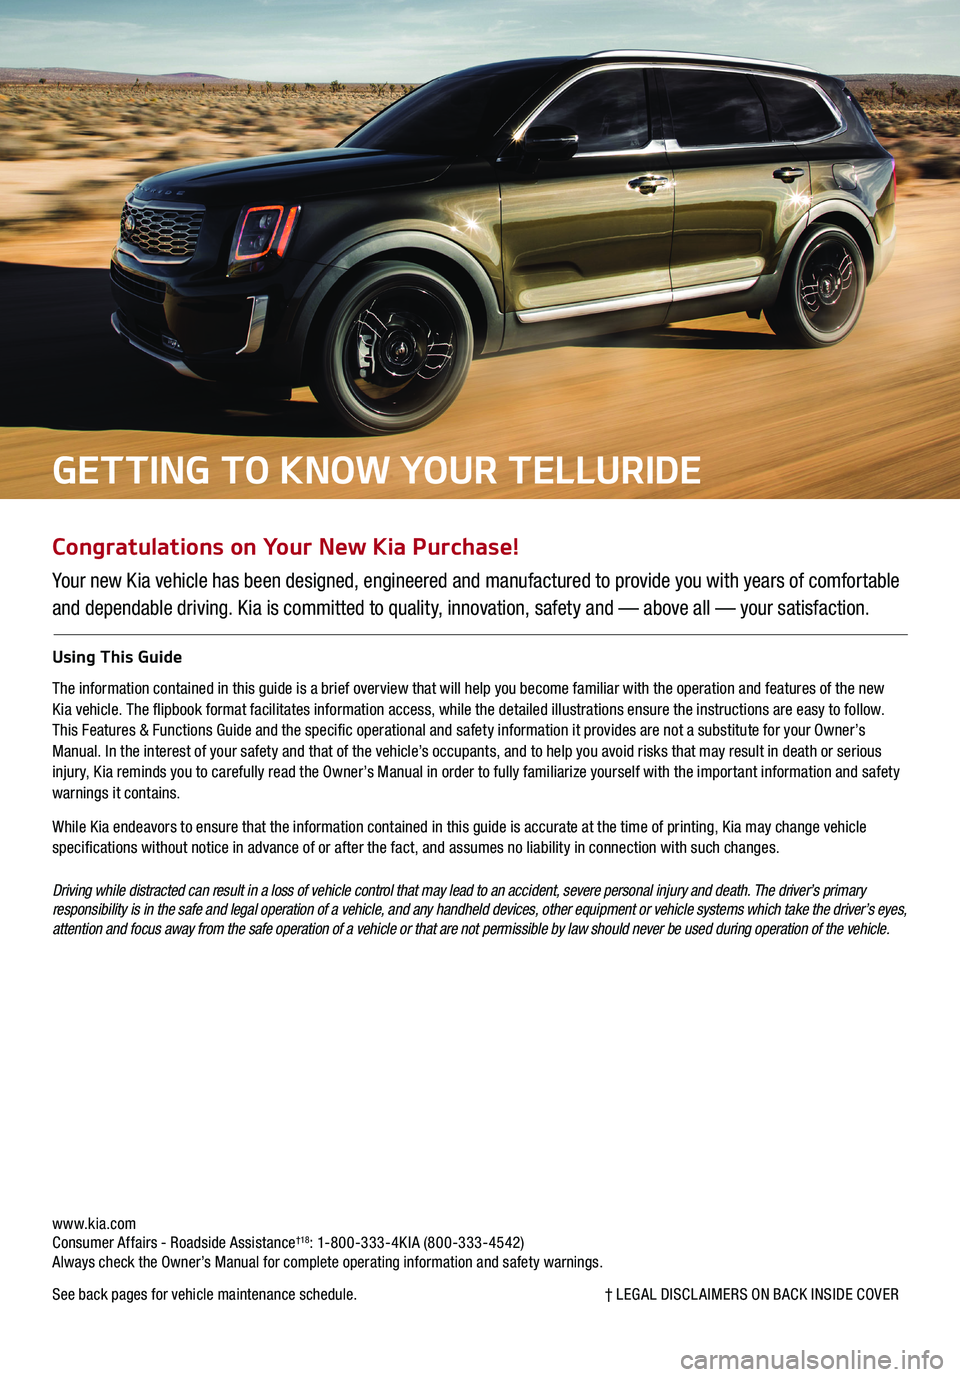 KIA TELLURIDE 2020  Features and Functions Guide Congratulations on Your New Kia Purchase!
Your new Kia vehicle has been designed, engineered and manufactured to provide you with years of comfortable 
and dependable driving. Kia is committed to qual